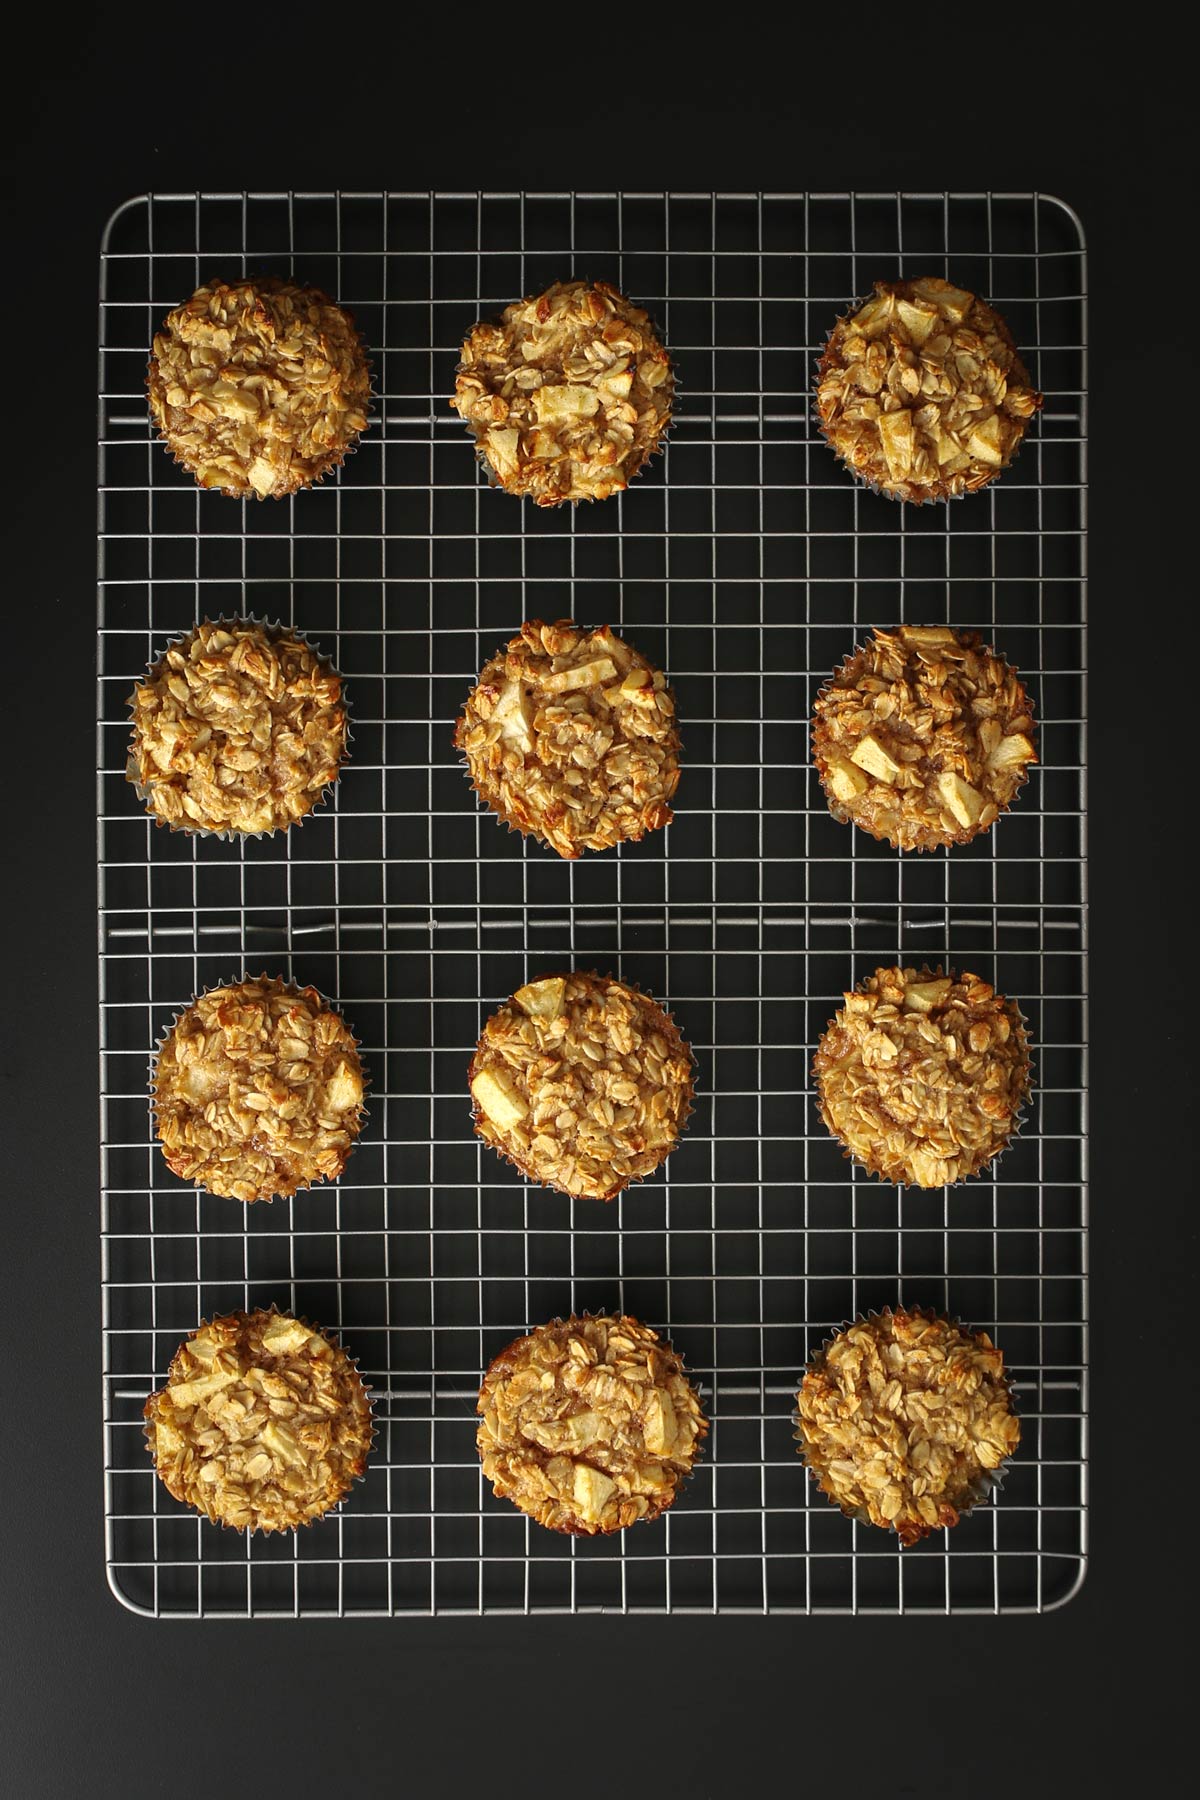 baked oatmeal cups in an array on silver wire rack on black table.